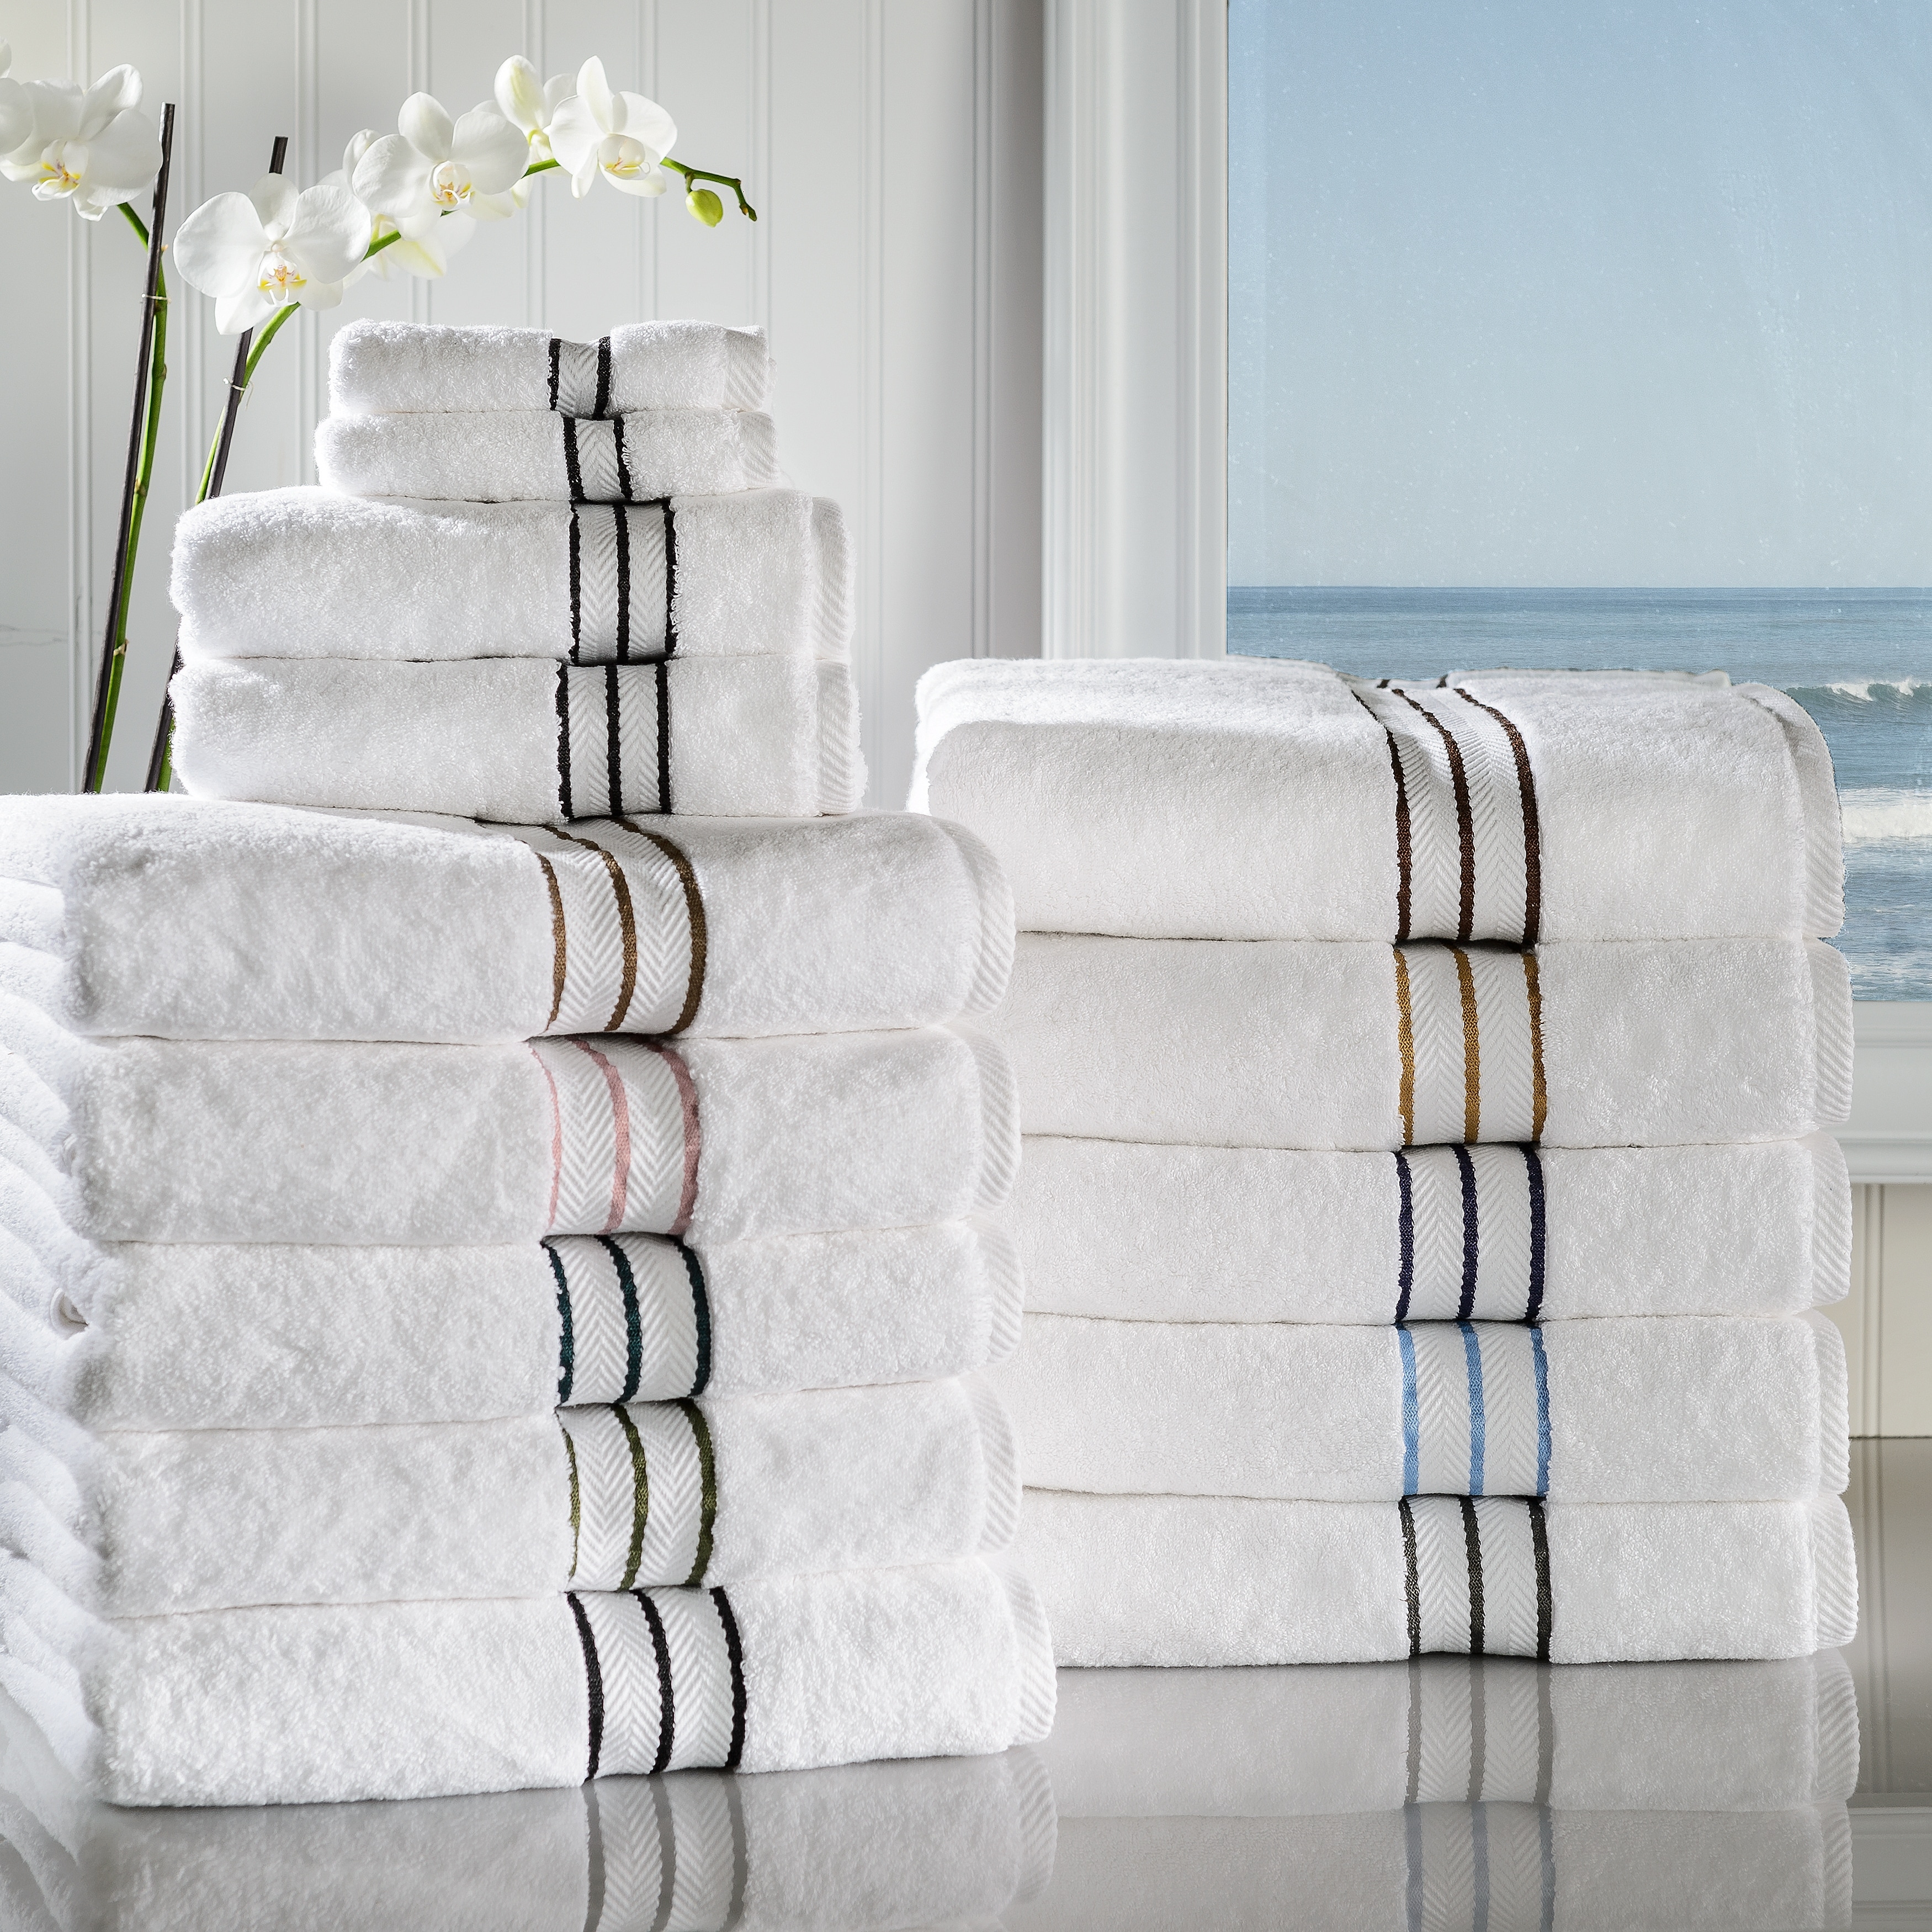 https://ak1.ostkcdn.com/images/products/is/images/direct/3860a57121338397751ae6a4f4ffc13b4b534119/Miranda-Haus-Marche-Egyptian-Cotton-6-Piece-Towel-Set.jpg